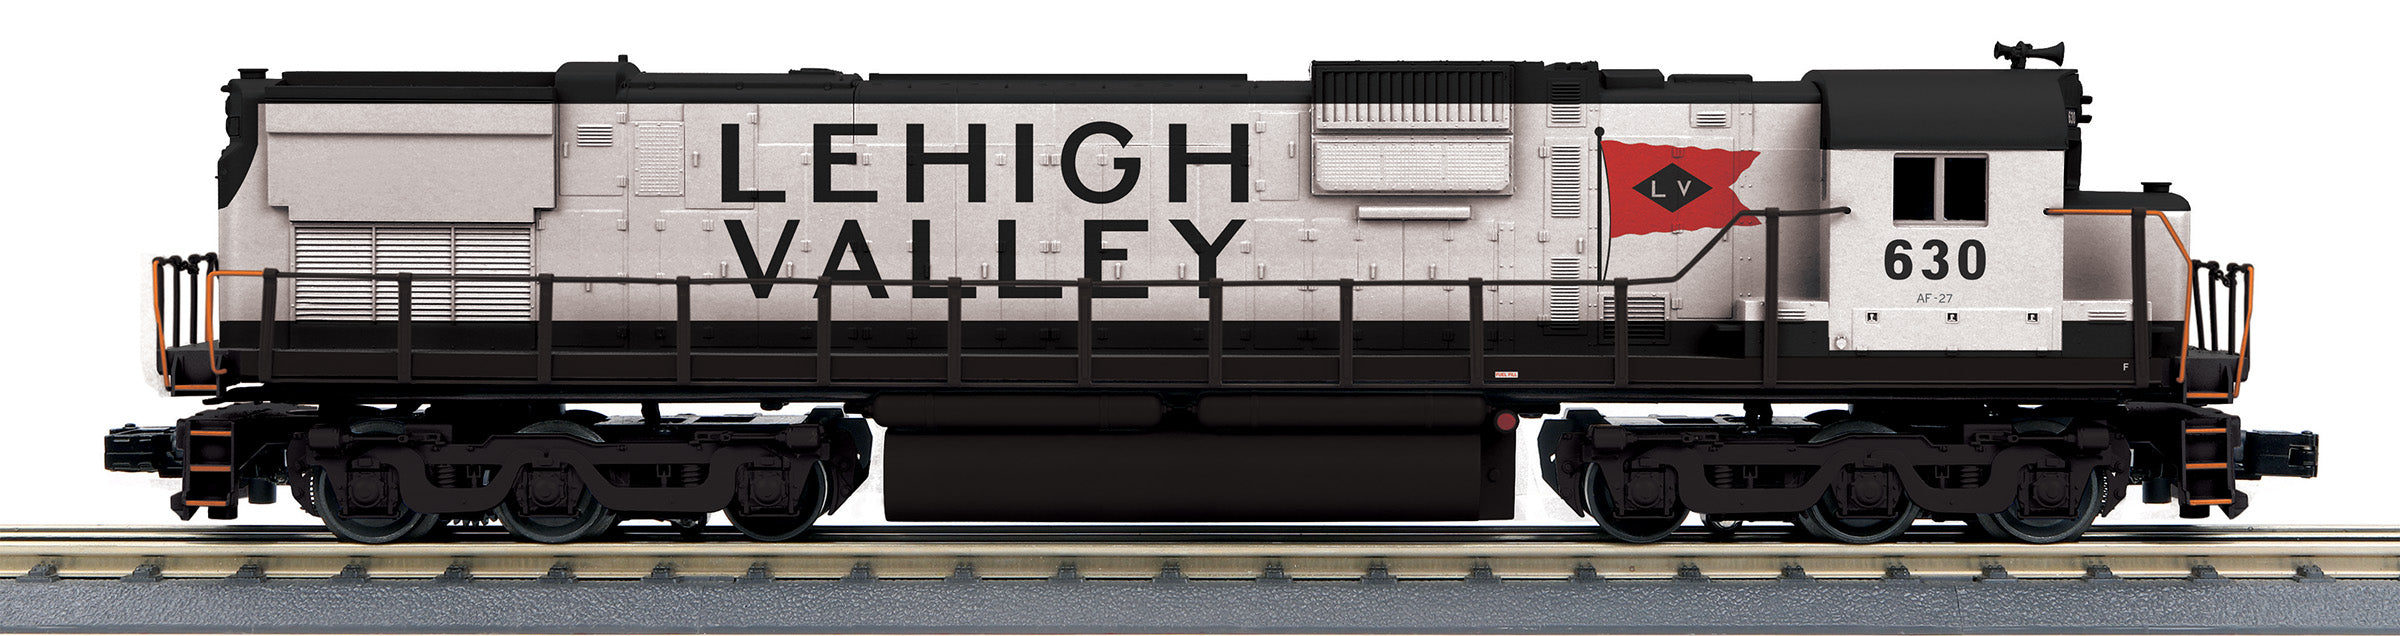 MTH 30-21102-1 - ALCO C-630 Diesel Locomotive "Lehigh Valley" #630 w/ PS3 - Custom Run for Public Delivery Track